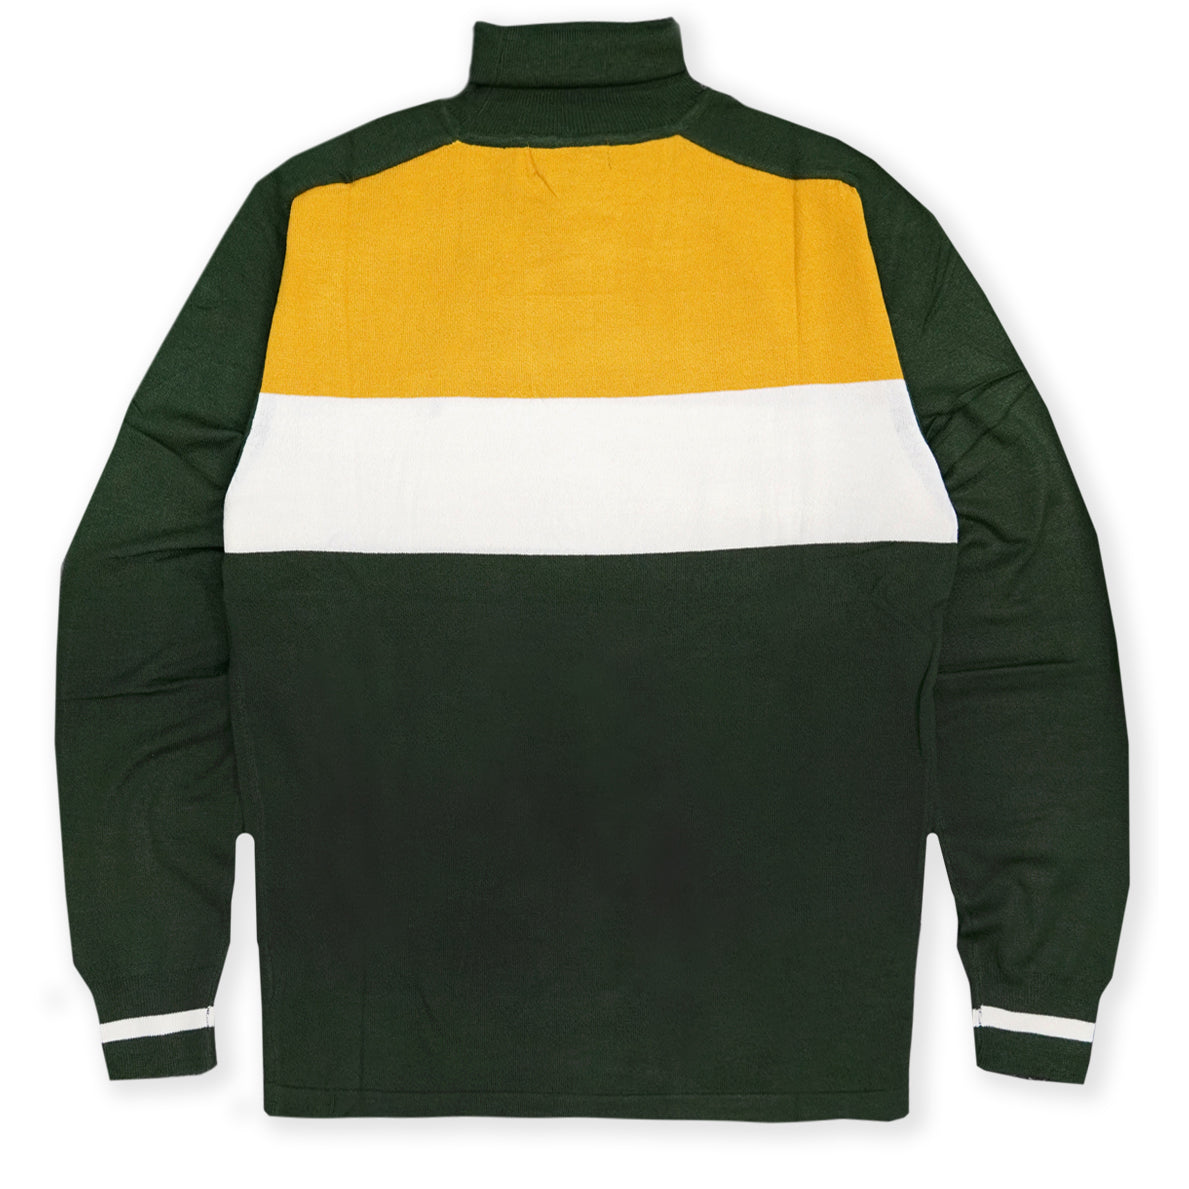 M4000 Turtle neck Knit Sweater - Olive